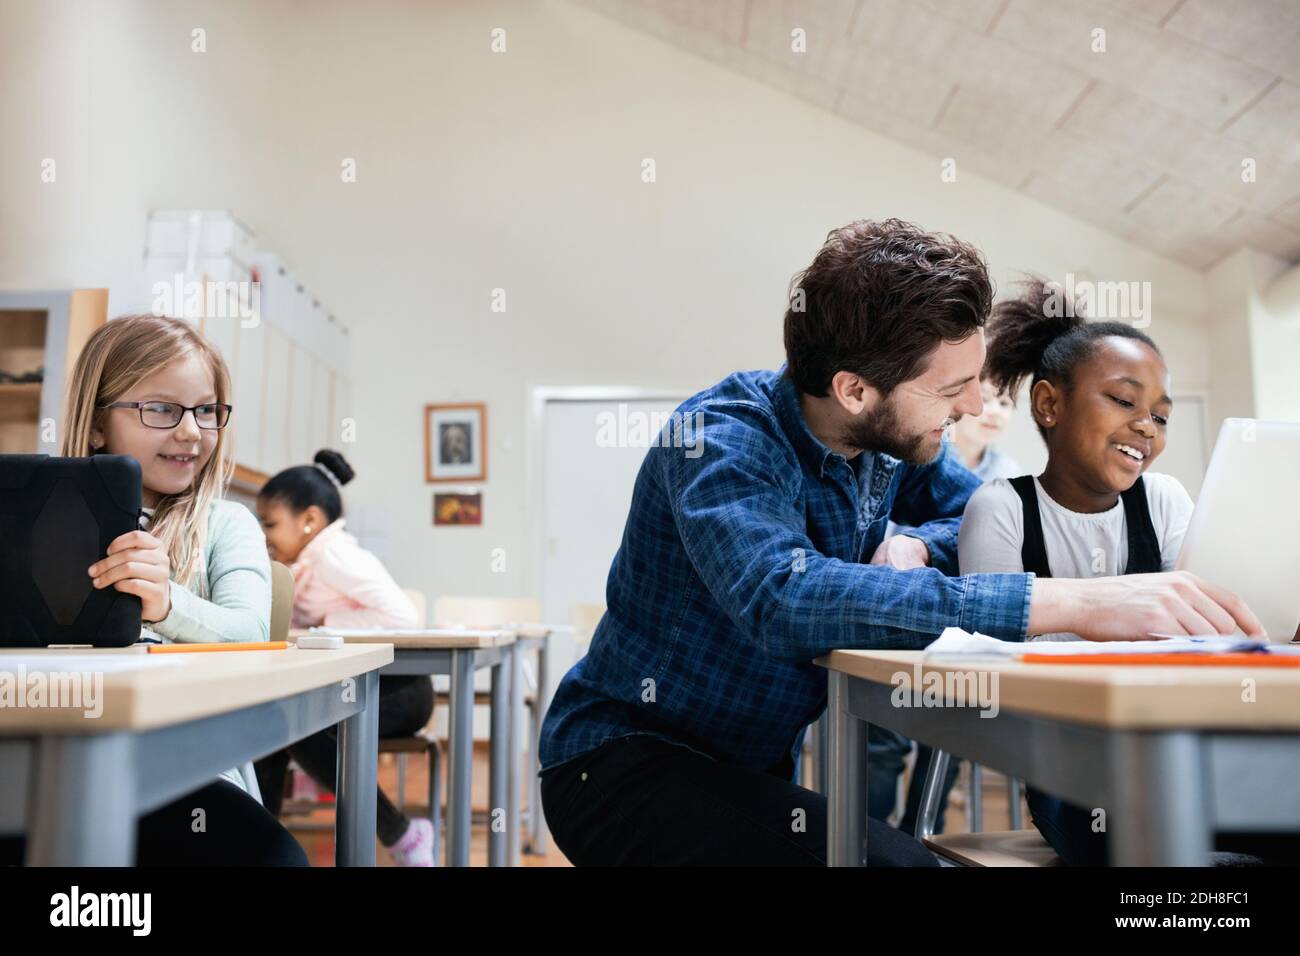 Smiling teacher with students using digital tablet at classroom Stock Photo